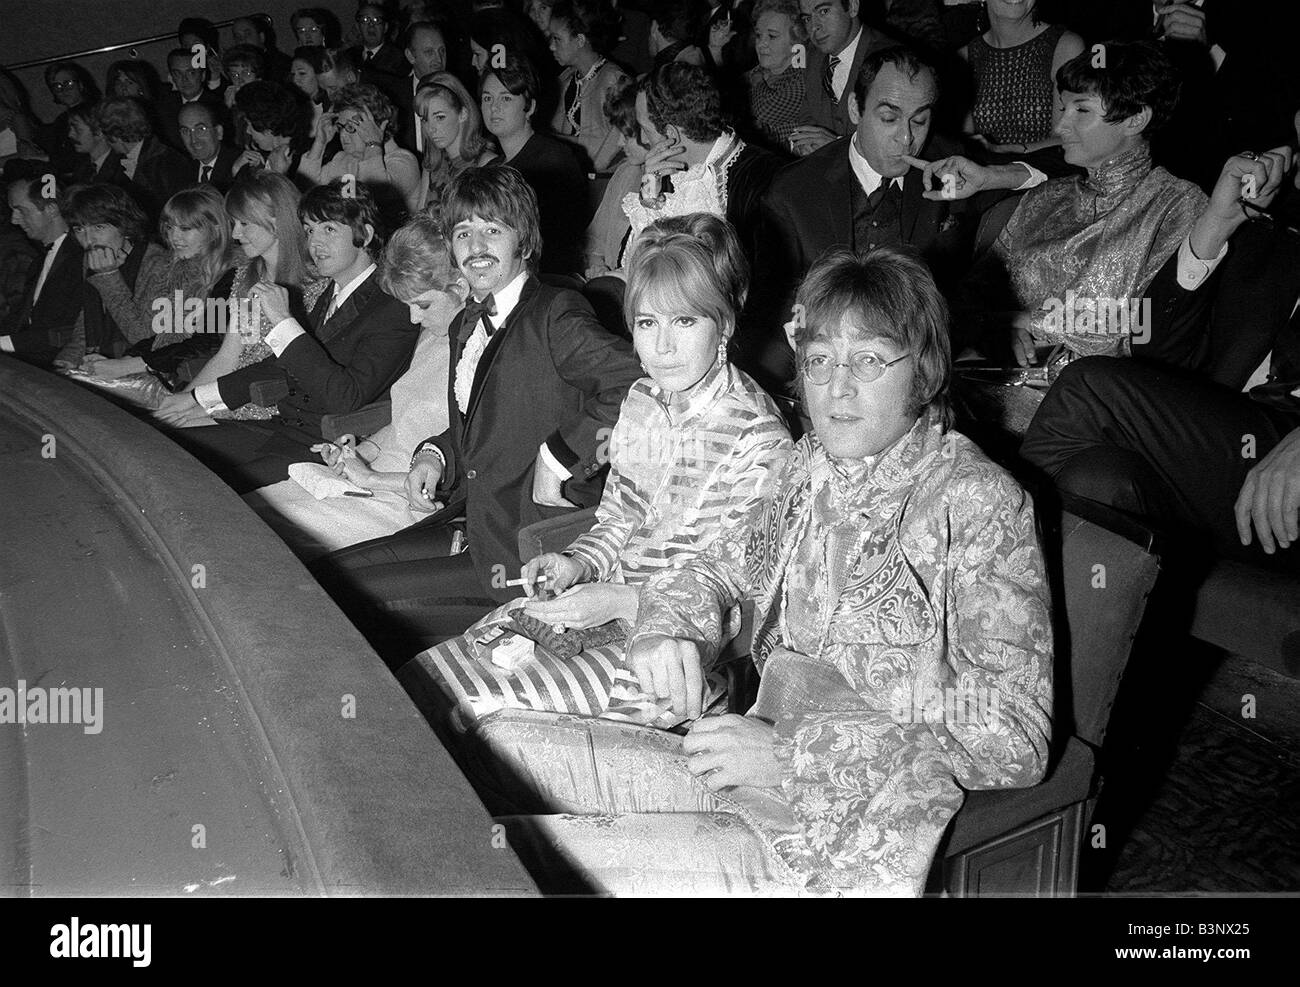 The Beatles at film premiere of How I Won the War with their wives which stars John Lennon at Piccadilly Circus October 1967 Stock Photo